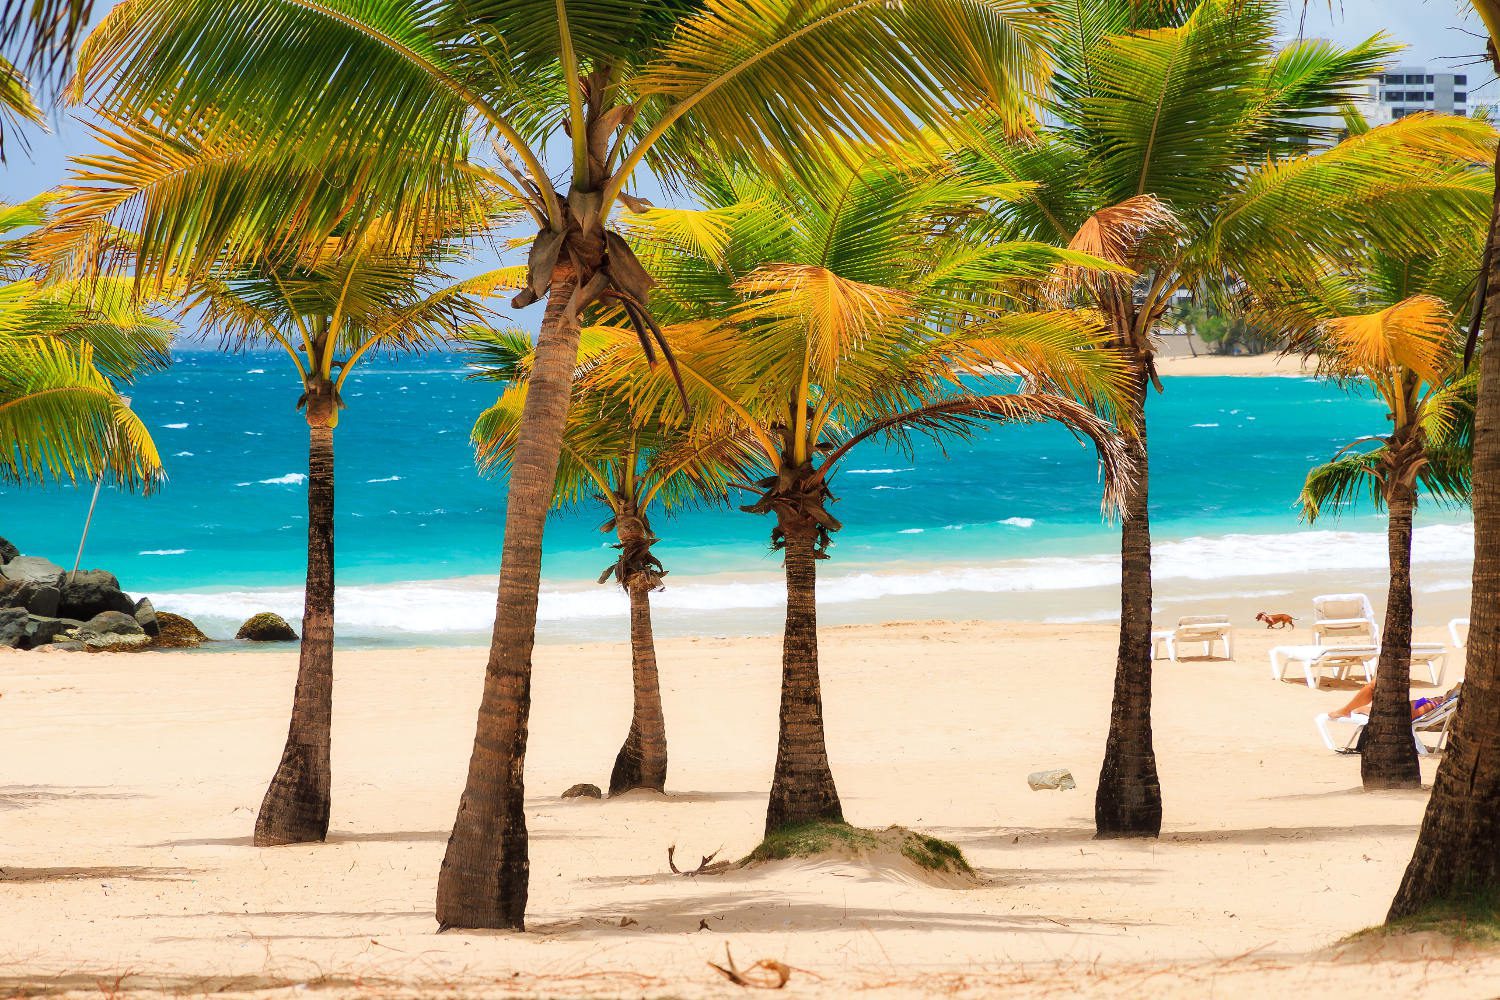 Beach, Please! You Won’t Want to Miss These Top Three Beaches in Puerto